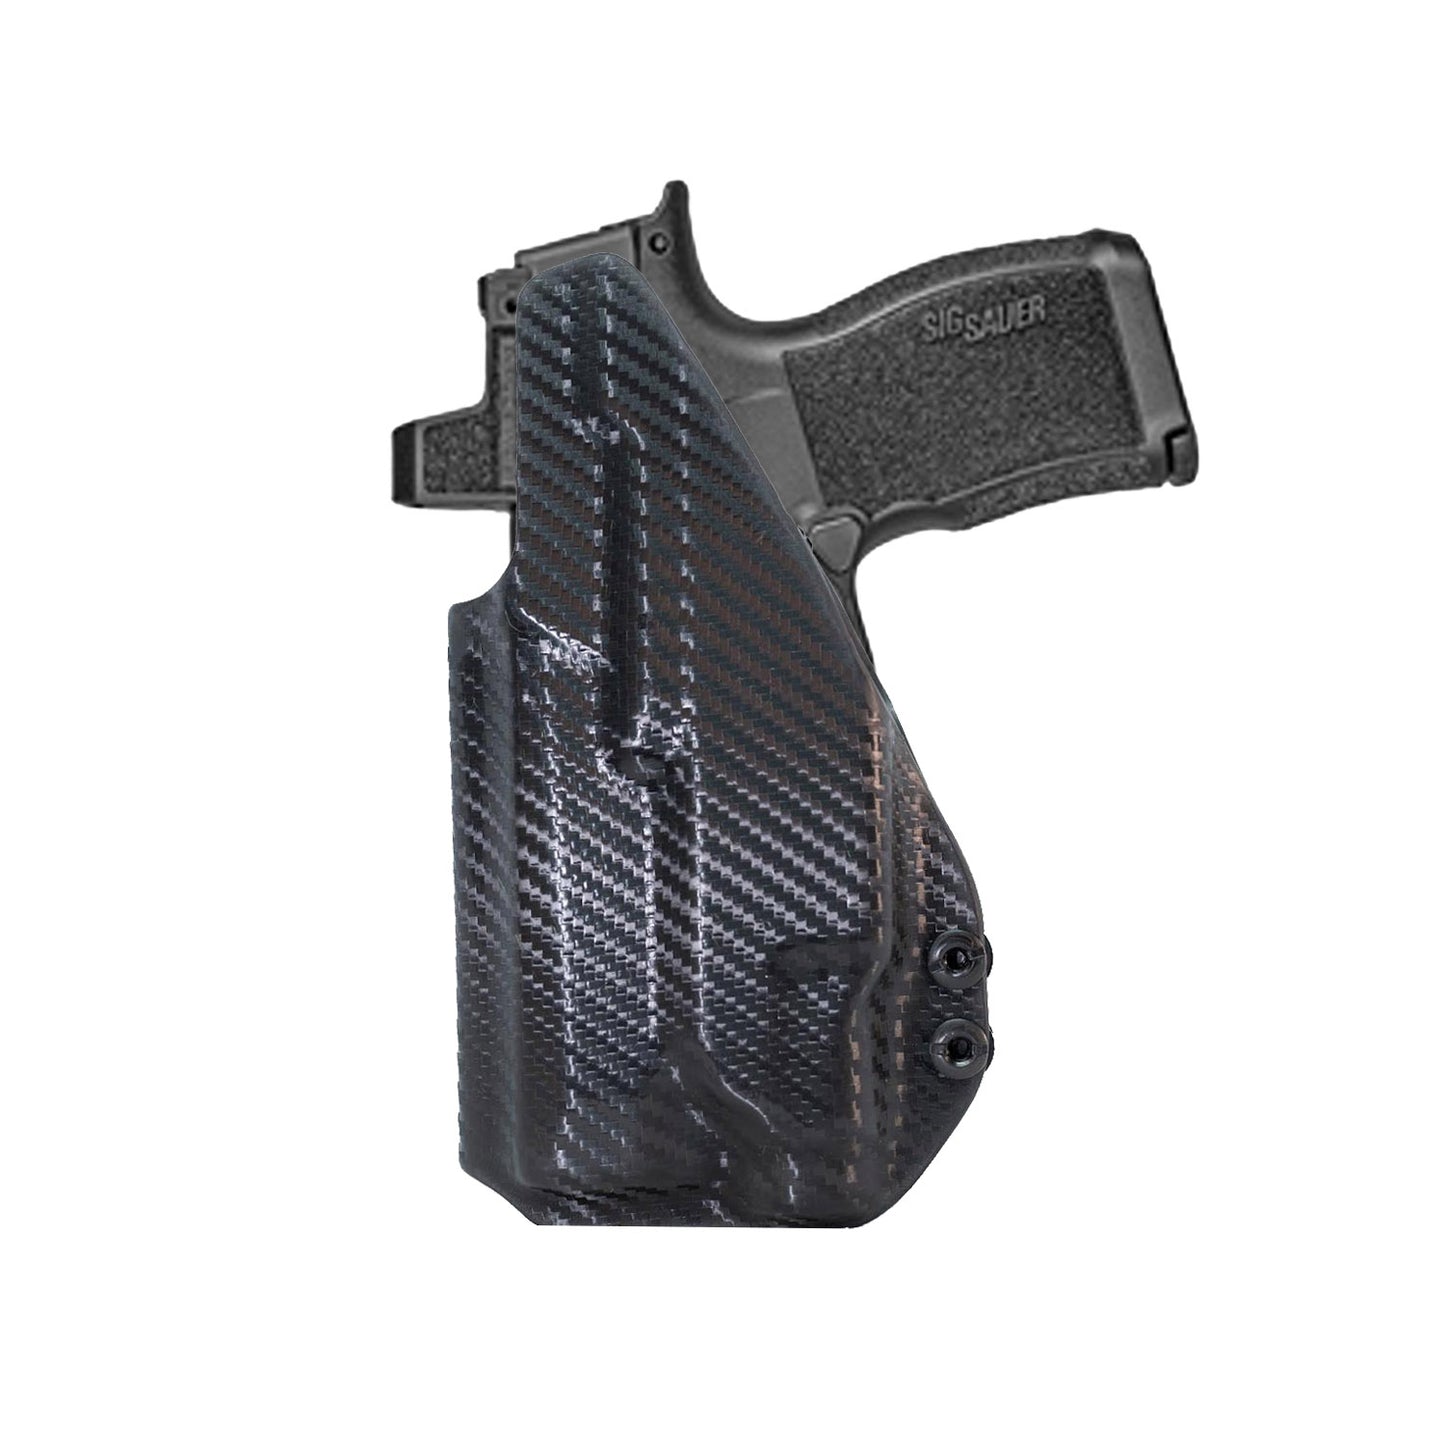 GLOCK 48 With TLR7-SUB Light IWB (Inside The Waistband Holster)